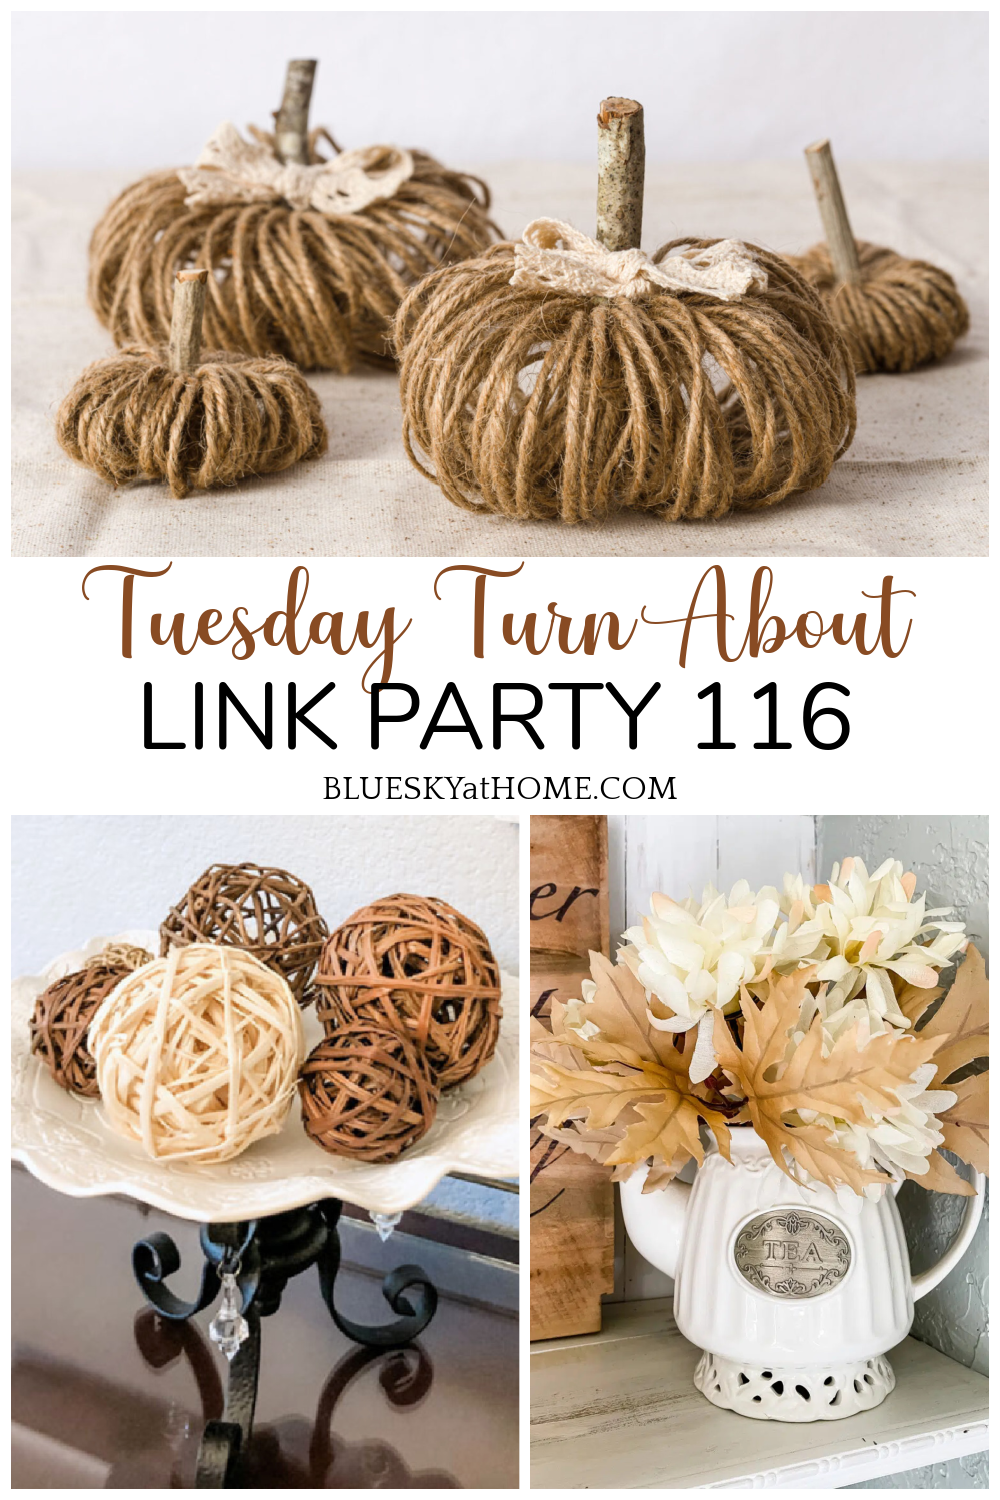 Tuesday Turn About Link Party 115